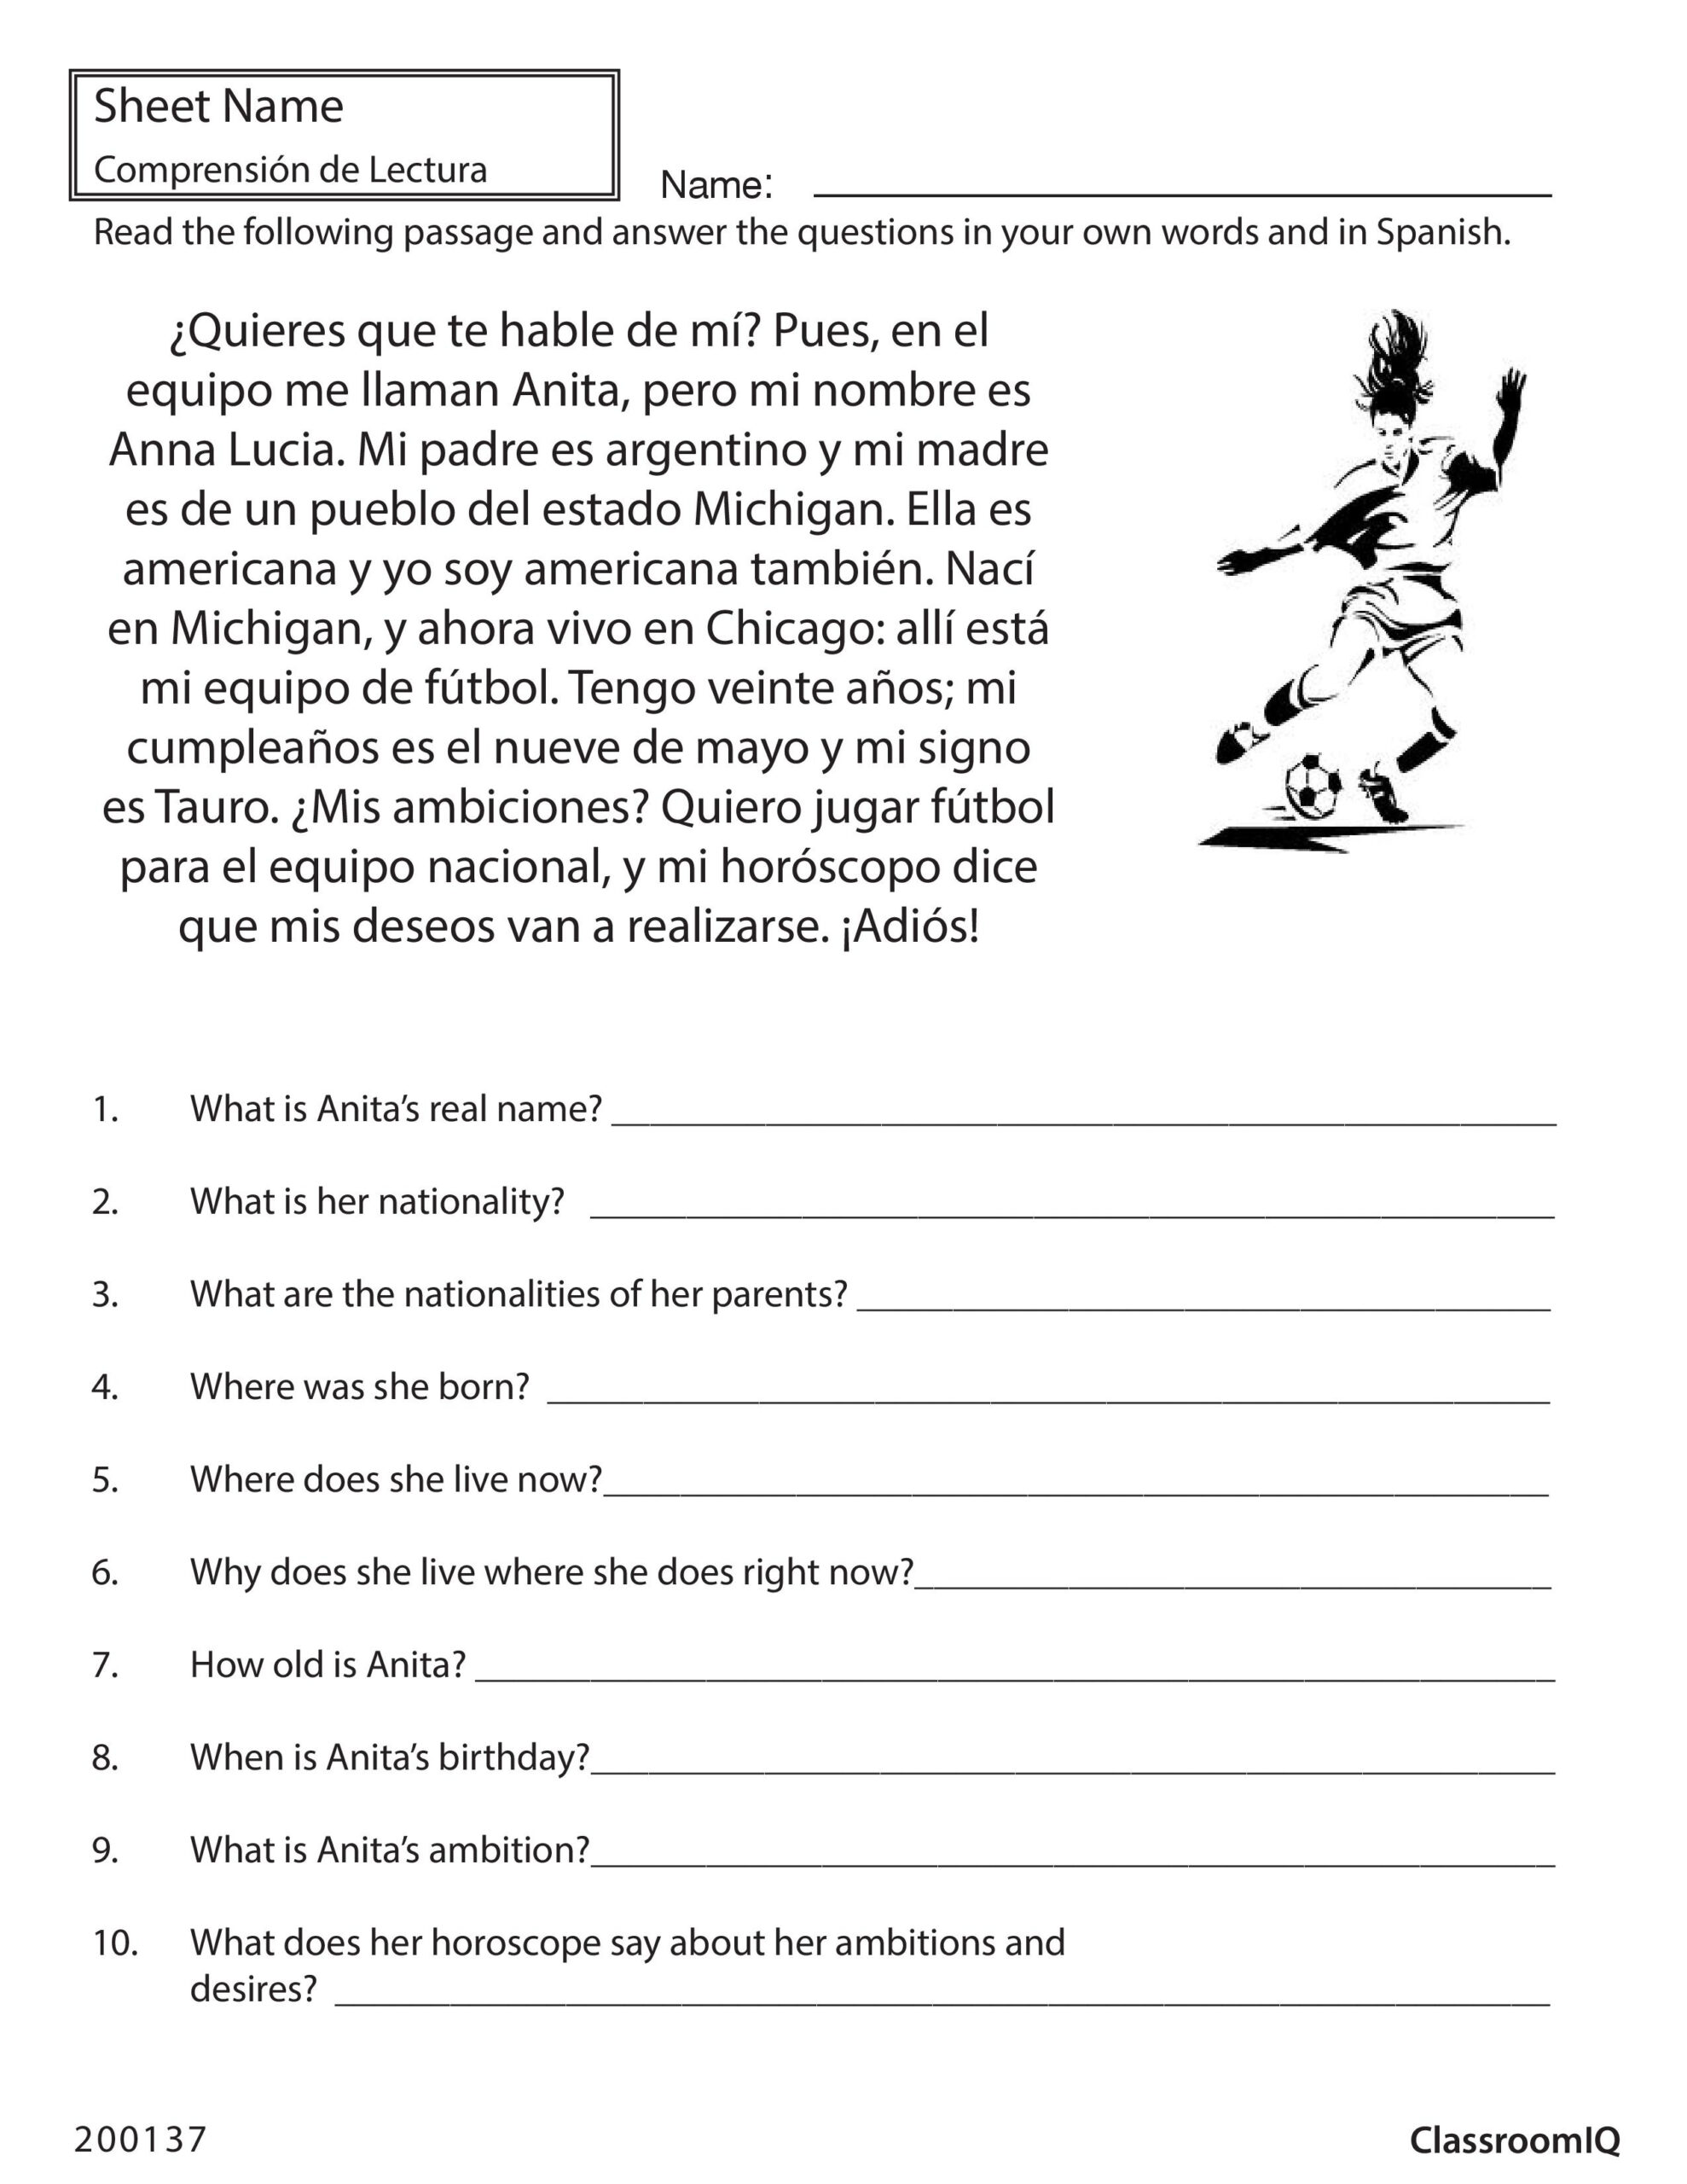 Read Spanish Passage And Answer Questions In English spanishworksheet 